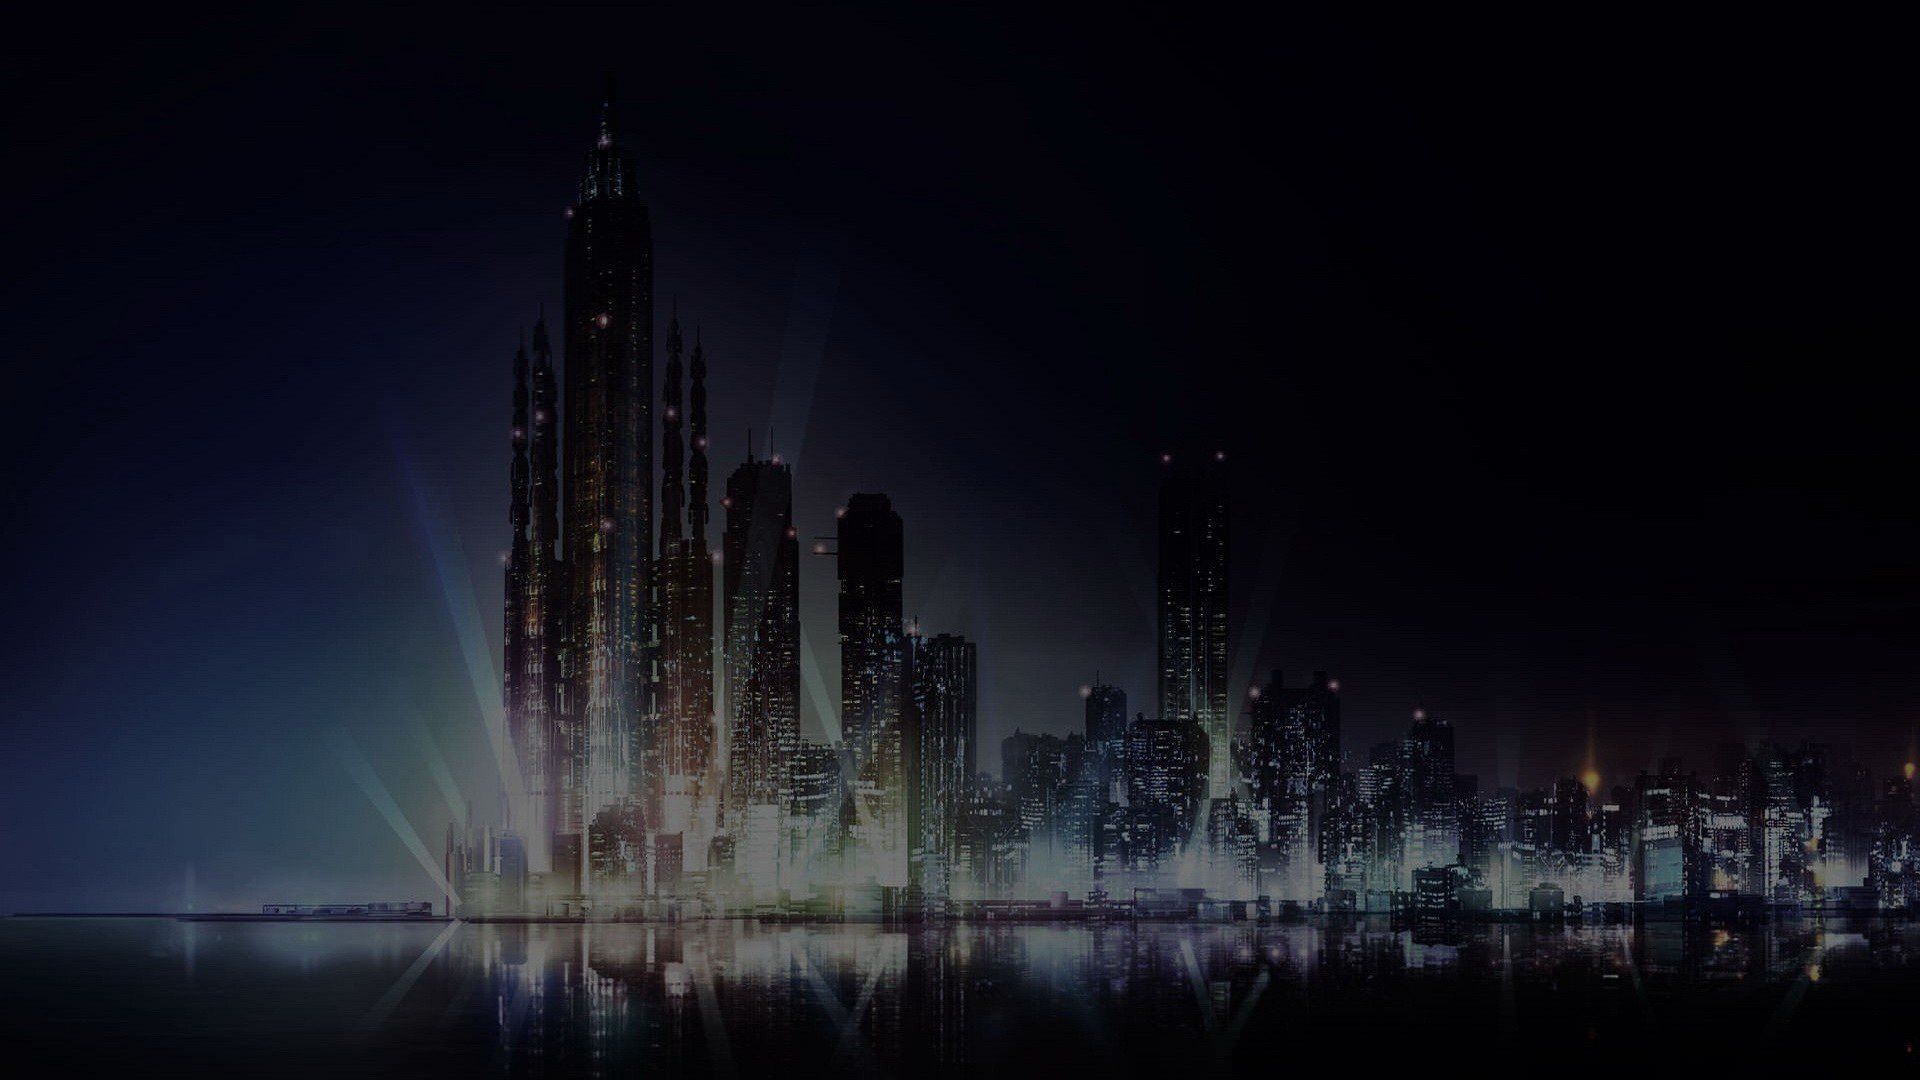 Water Cityscapes Dark Night Lights Buildings Skyscrapers Scenic Anime Reflections Cities Skies Psycho Pass Sea Wallpaperx1080